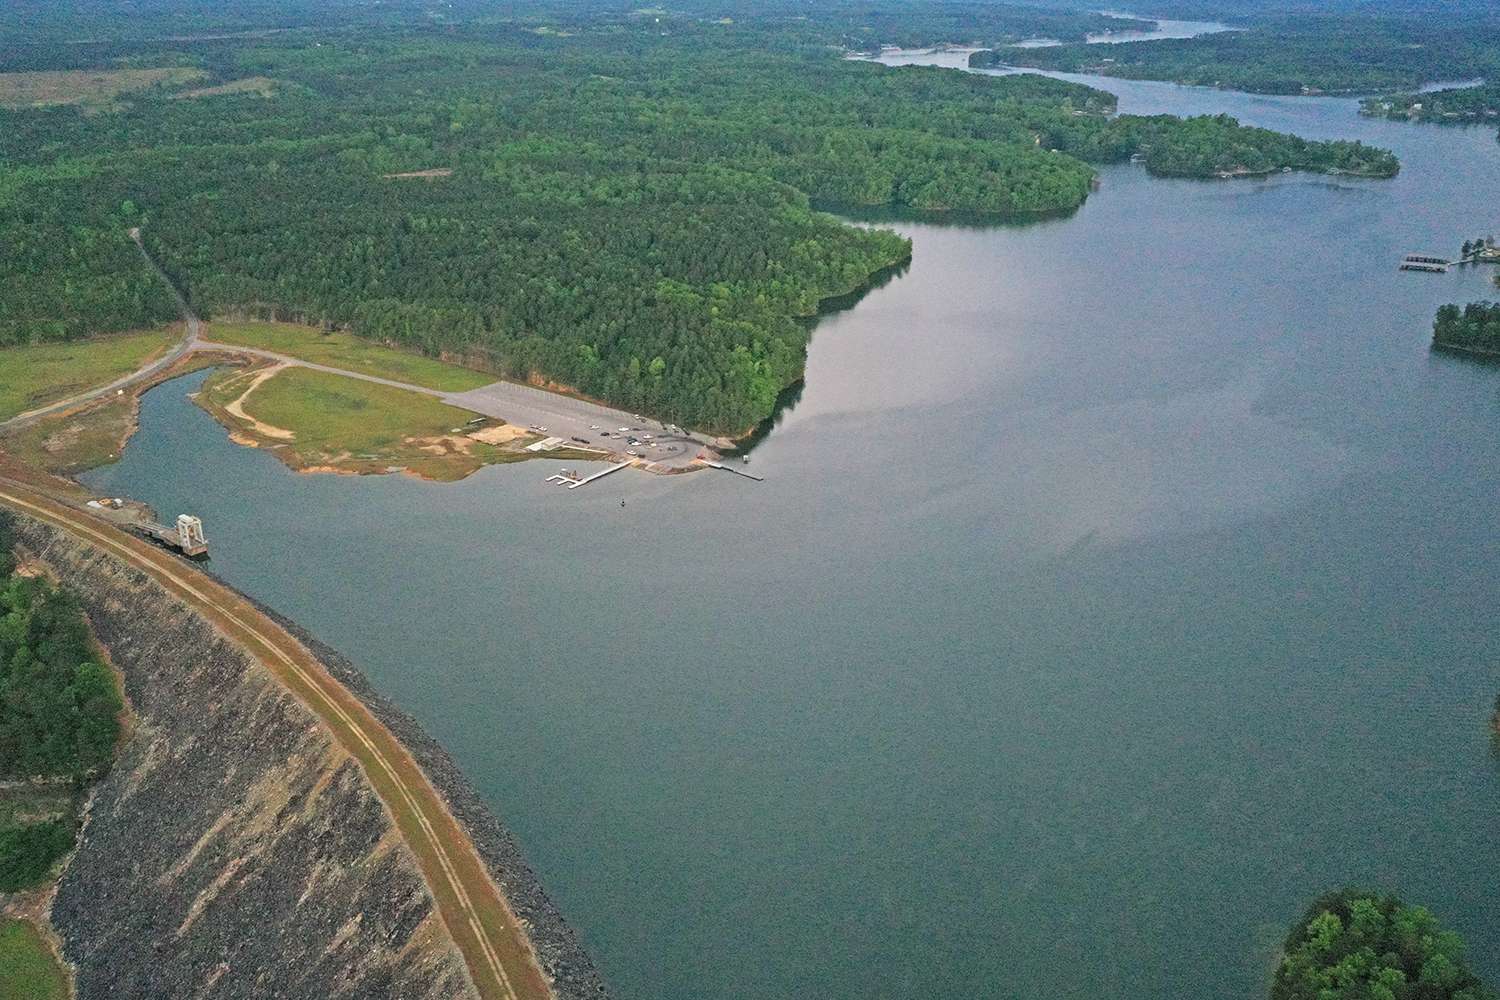 Since the impact of COVID-19, and many local stay-at-home ordinances that actually allow for fishing, we thought it would be interesting to make a loop around many of Alabama's most popular boat ramps.</p>
<p>There are certainly a few we weren't able to get to, but the following aerial gallery is an overhead look at how anglers are fishing smart during this health crisis in America. Even on a Tuesday, most ramps we visited were busy.</p>
<p>This first image is from the dam at Lewis Smith Lake near Cullman, Ala. Since the sun had just come up, and it was a weekday, the ramp doesn't look very busy. But, there is a bunch of construction taking place, and by the time I left, seven or eight additional boats had launched. 